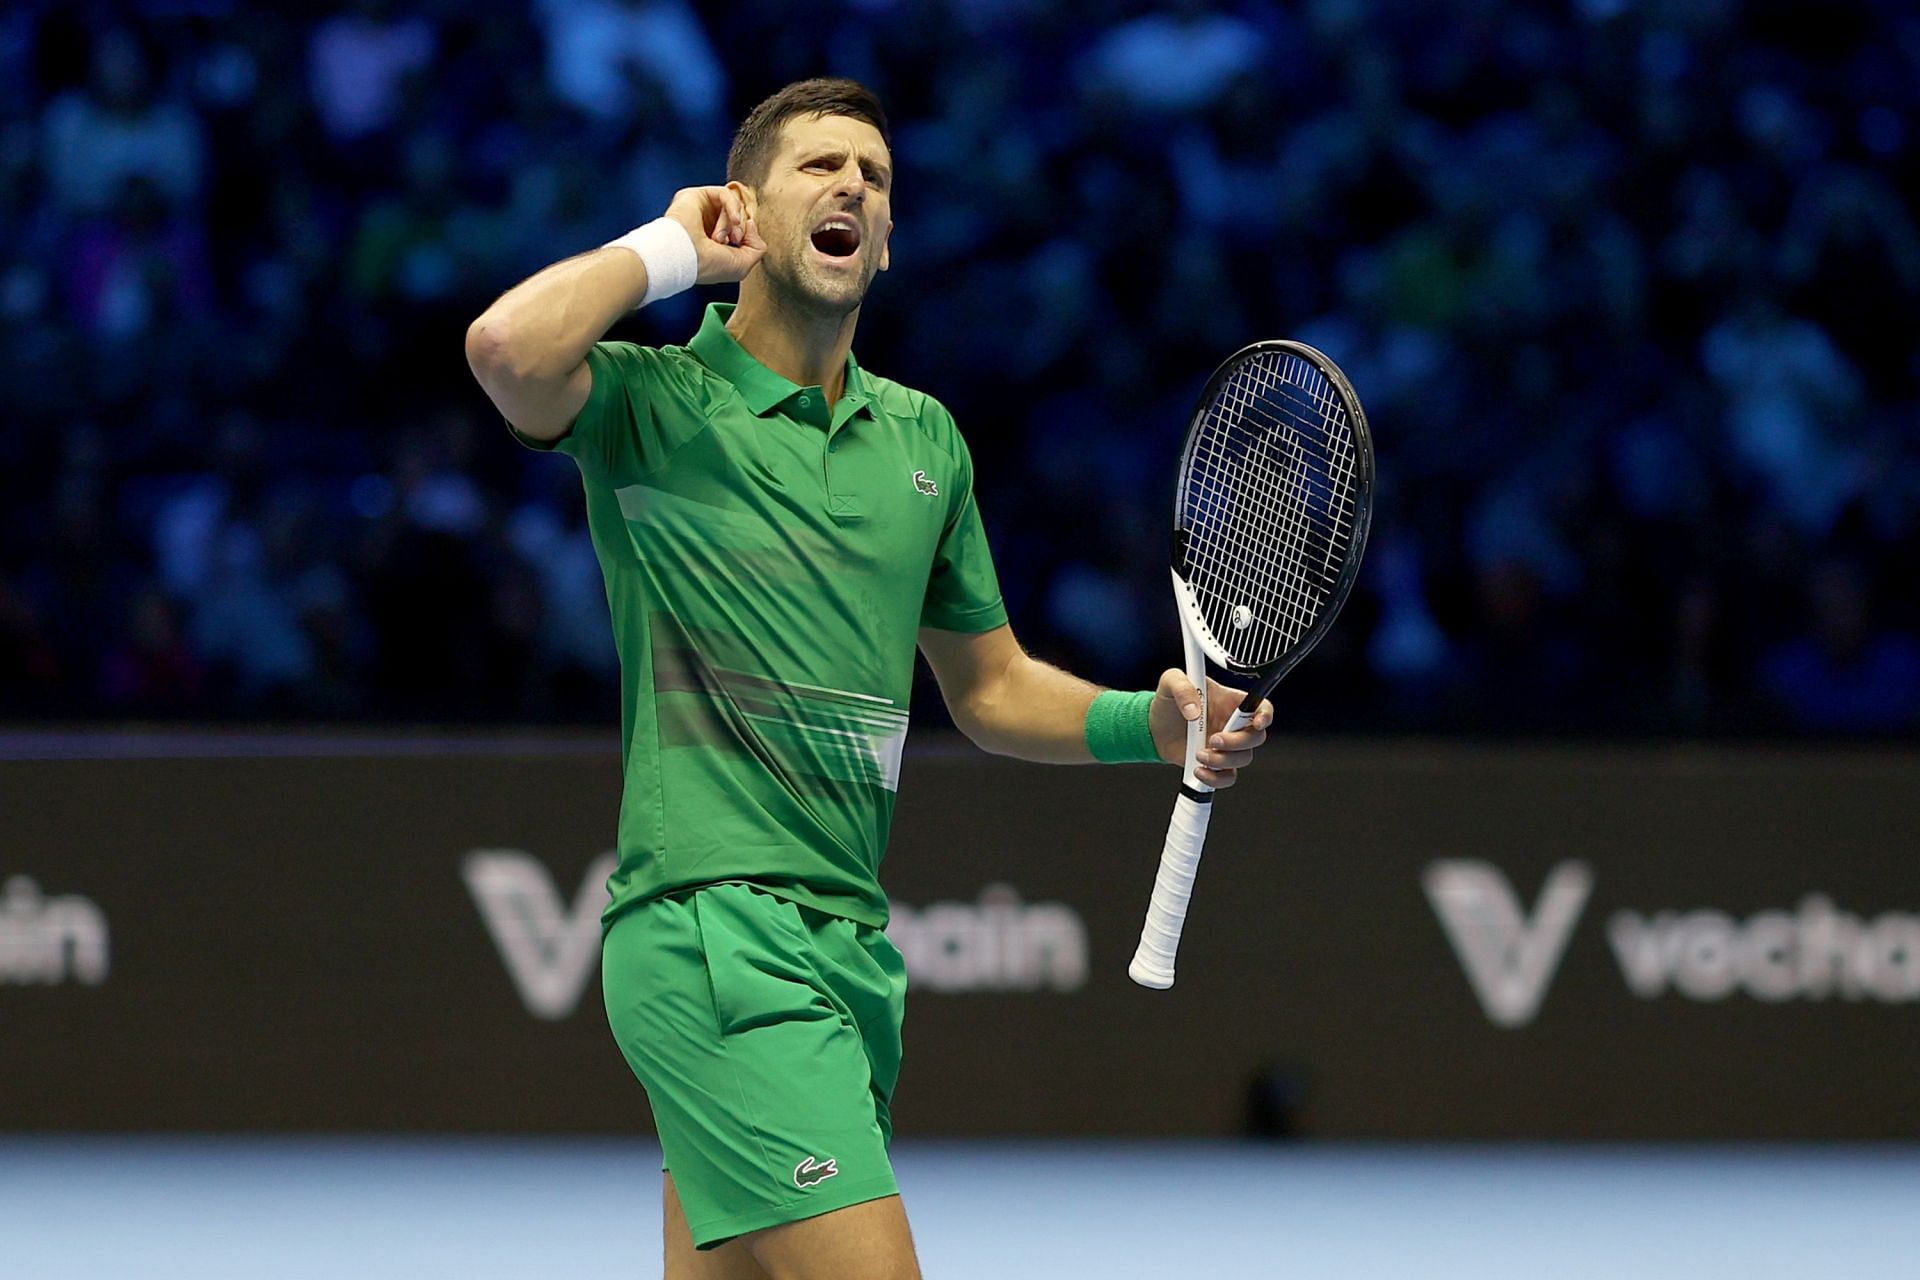 Novak Djokovic in action against Stefanos Tsitsipas at the 2022 ATP Finals in Turin.